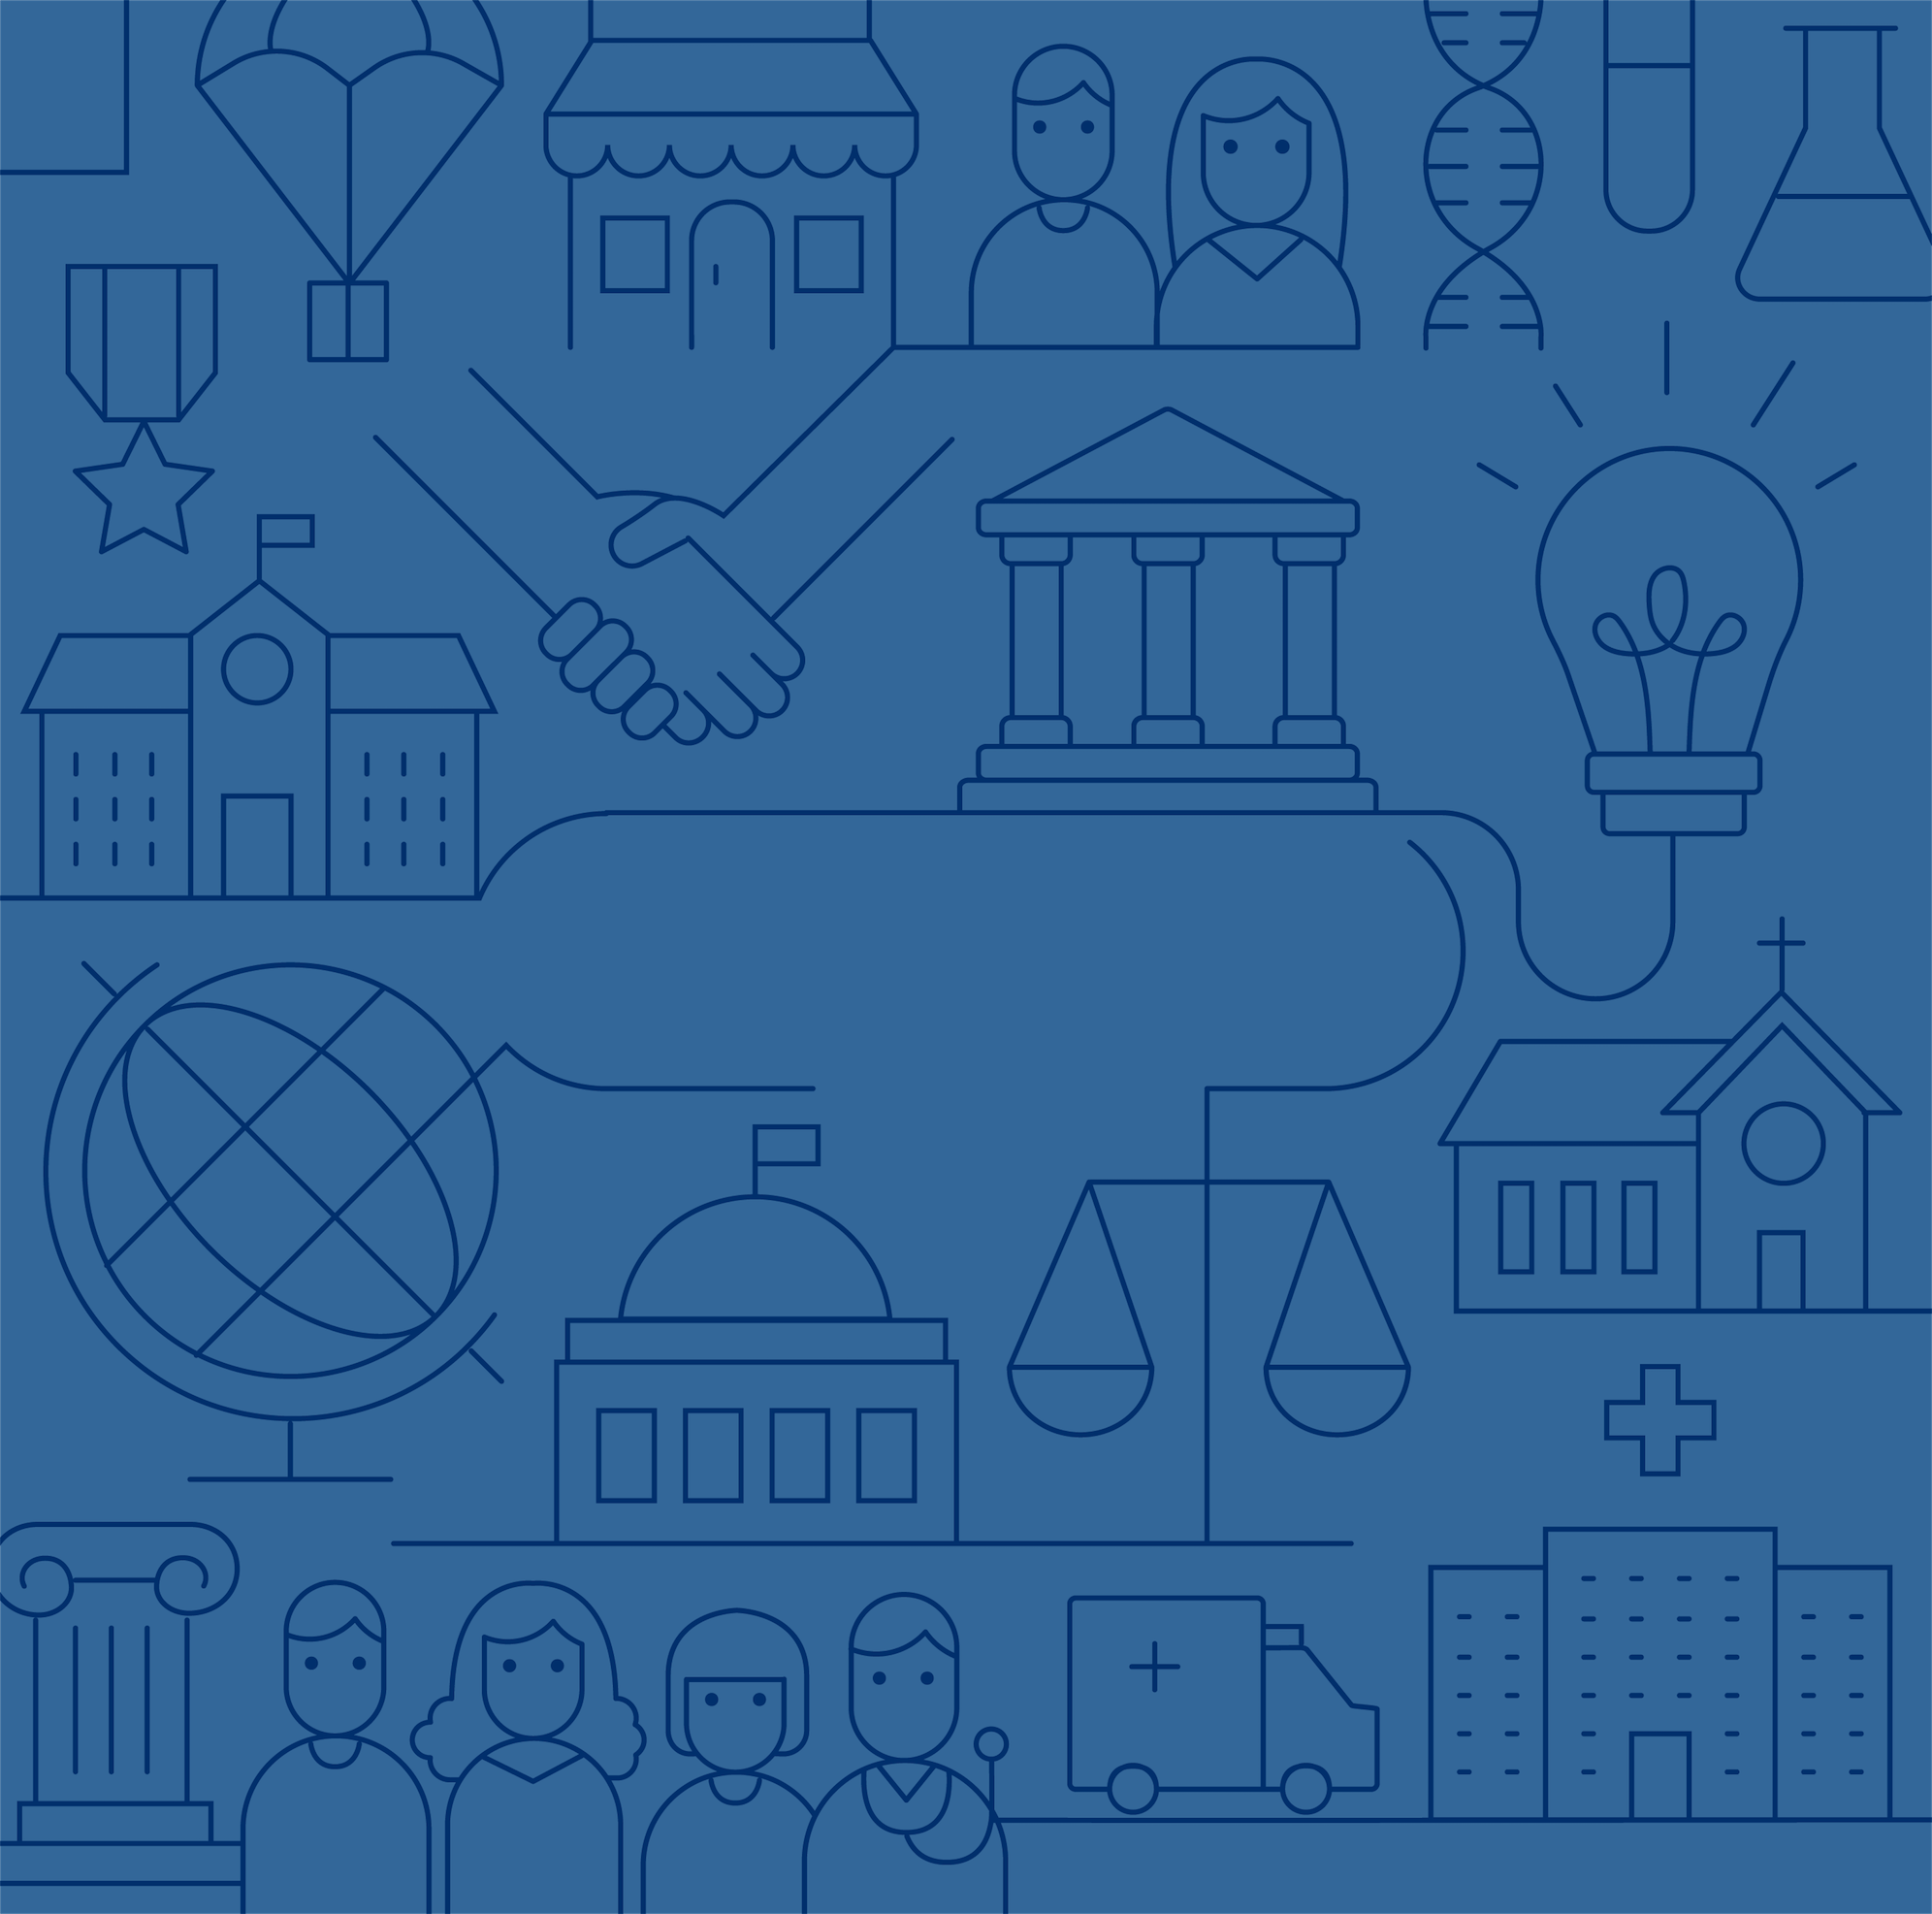 Graphic illustration representing parternship, with reference to partners such as NGOS, universities, U.S. government agencies, and faith-based organizations.